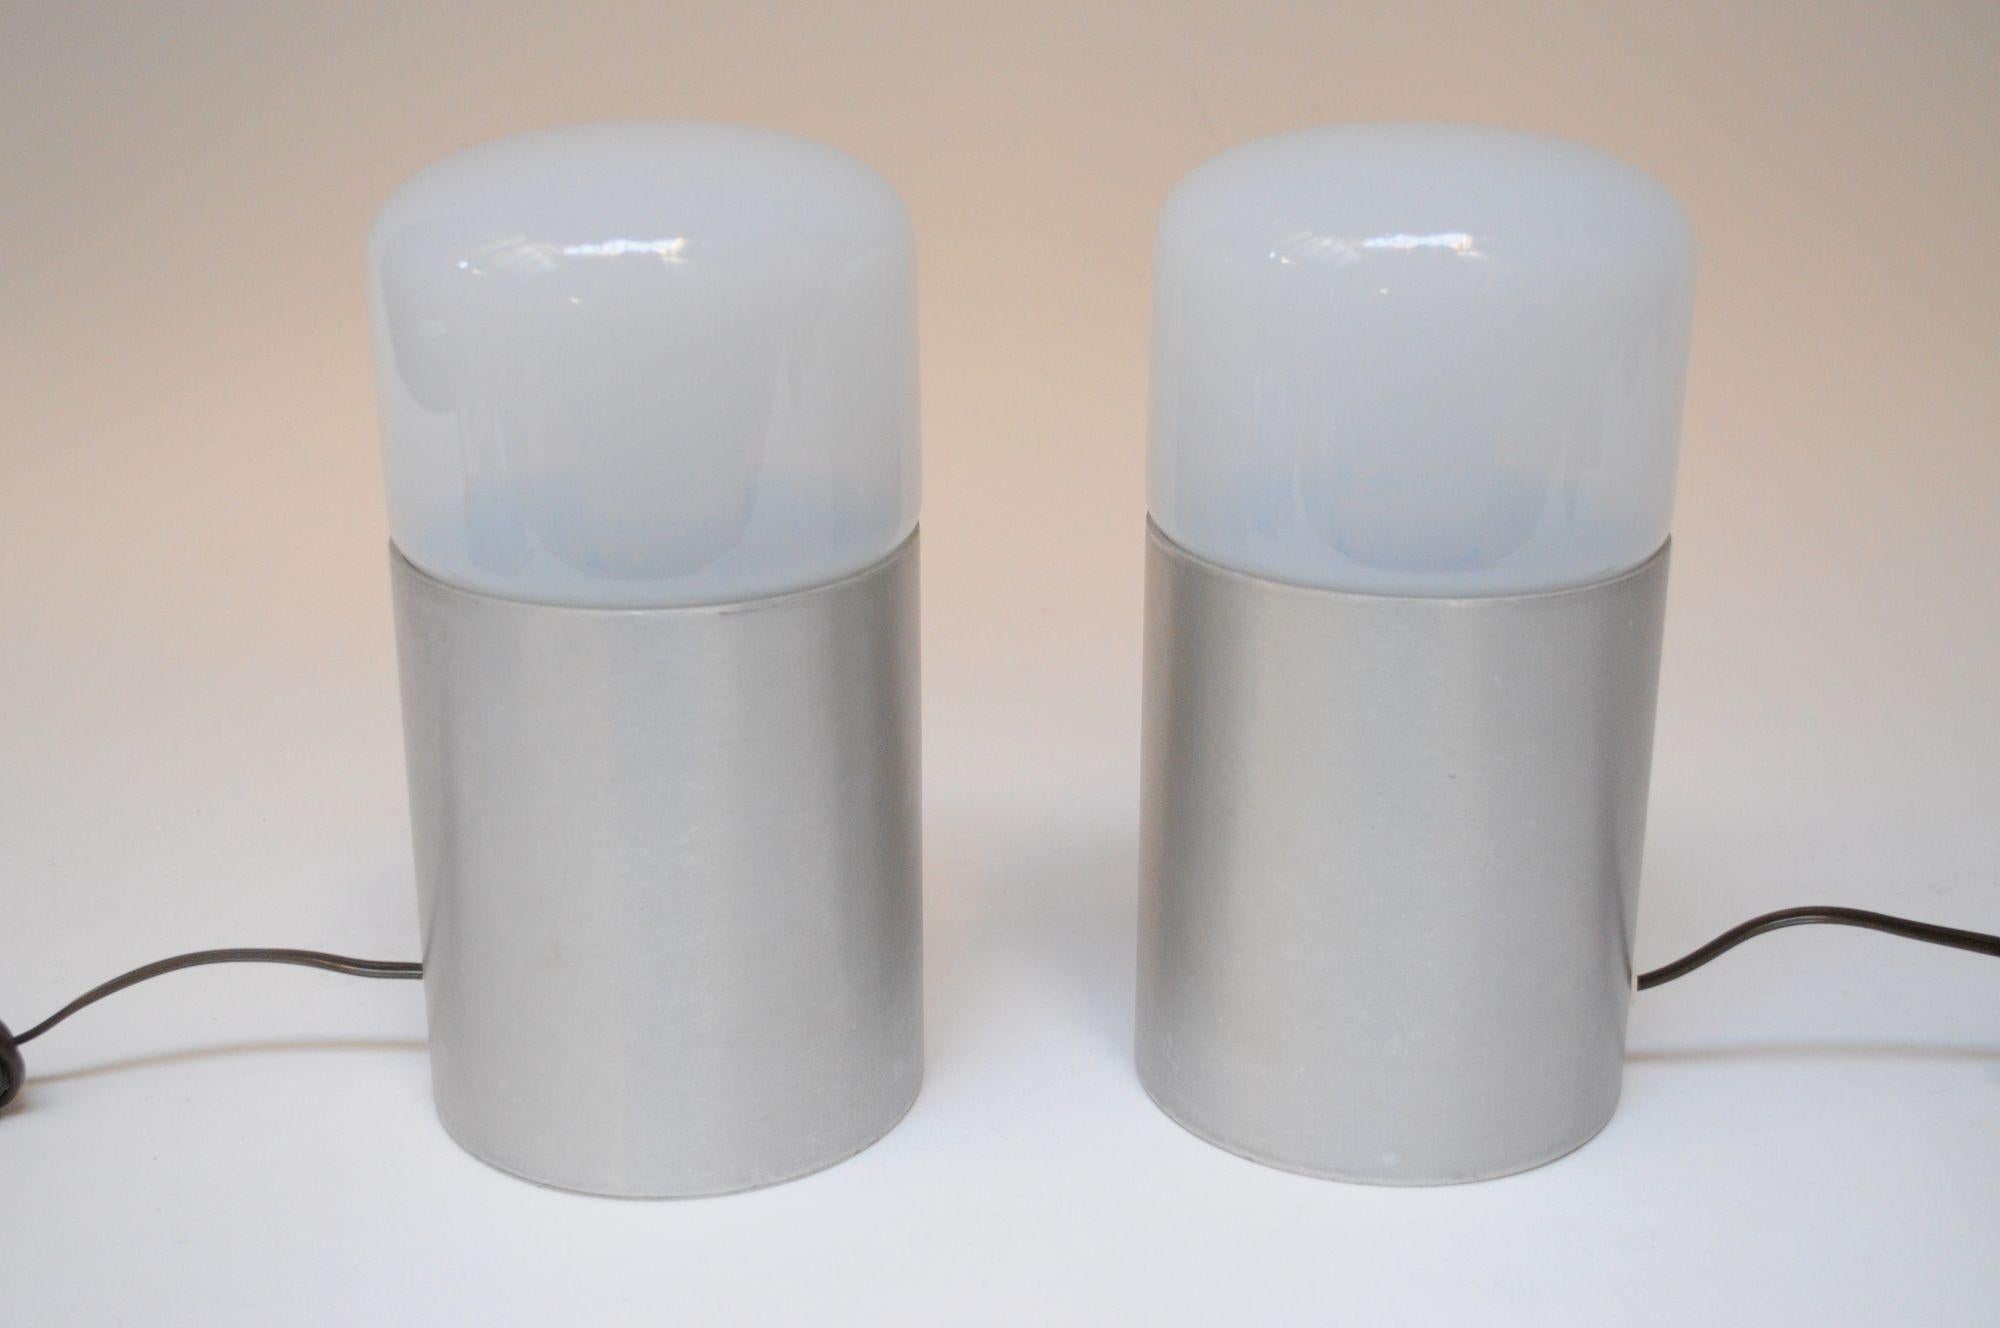 Pair of sleek, modernist bedside/tables lamps sourced from a hotel in Chianciano, Tuscany (ca. 1960s, Italy).
Composed of brushed aluminum cylindrical bases supporting blown opaline/milk glass shades.
Very good, vintage condition with minor wear to